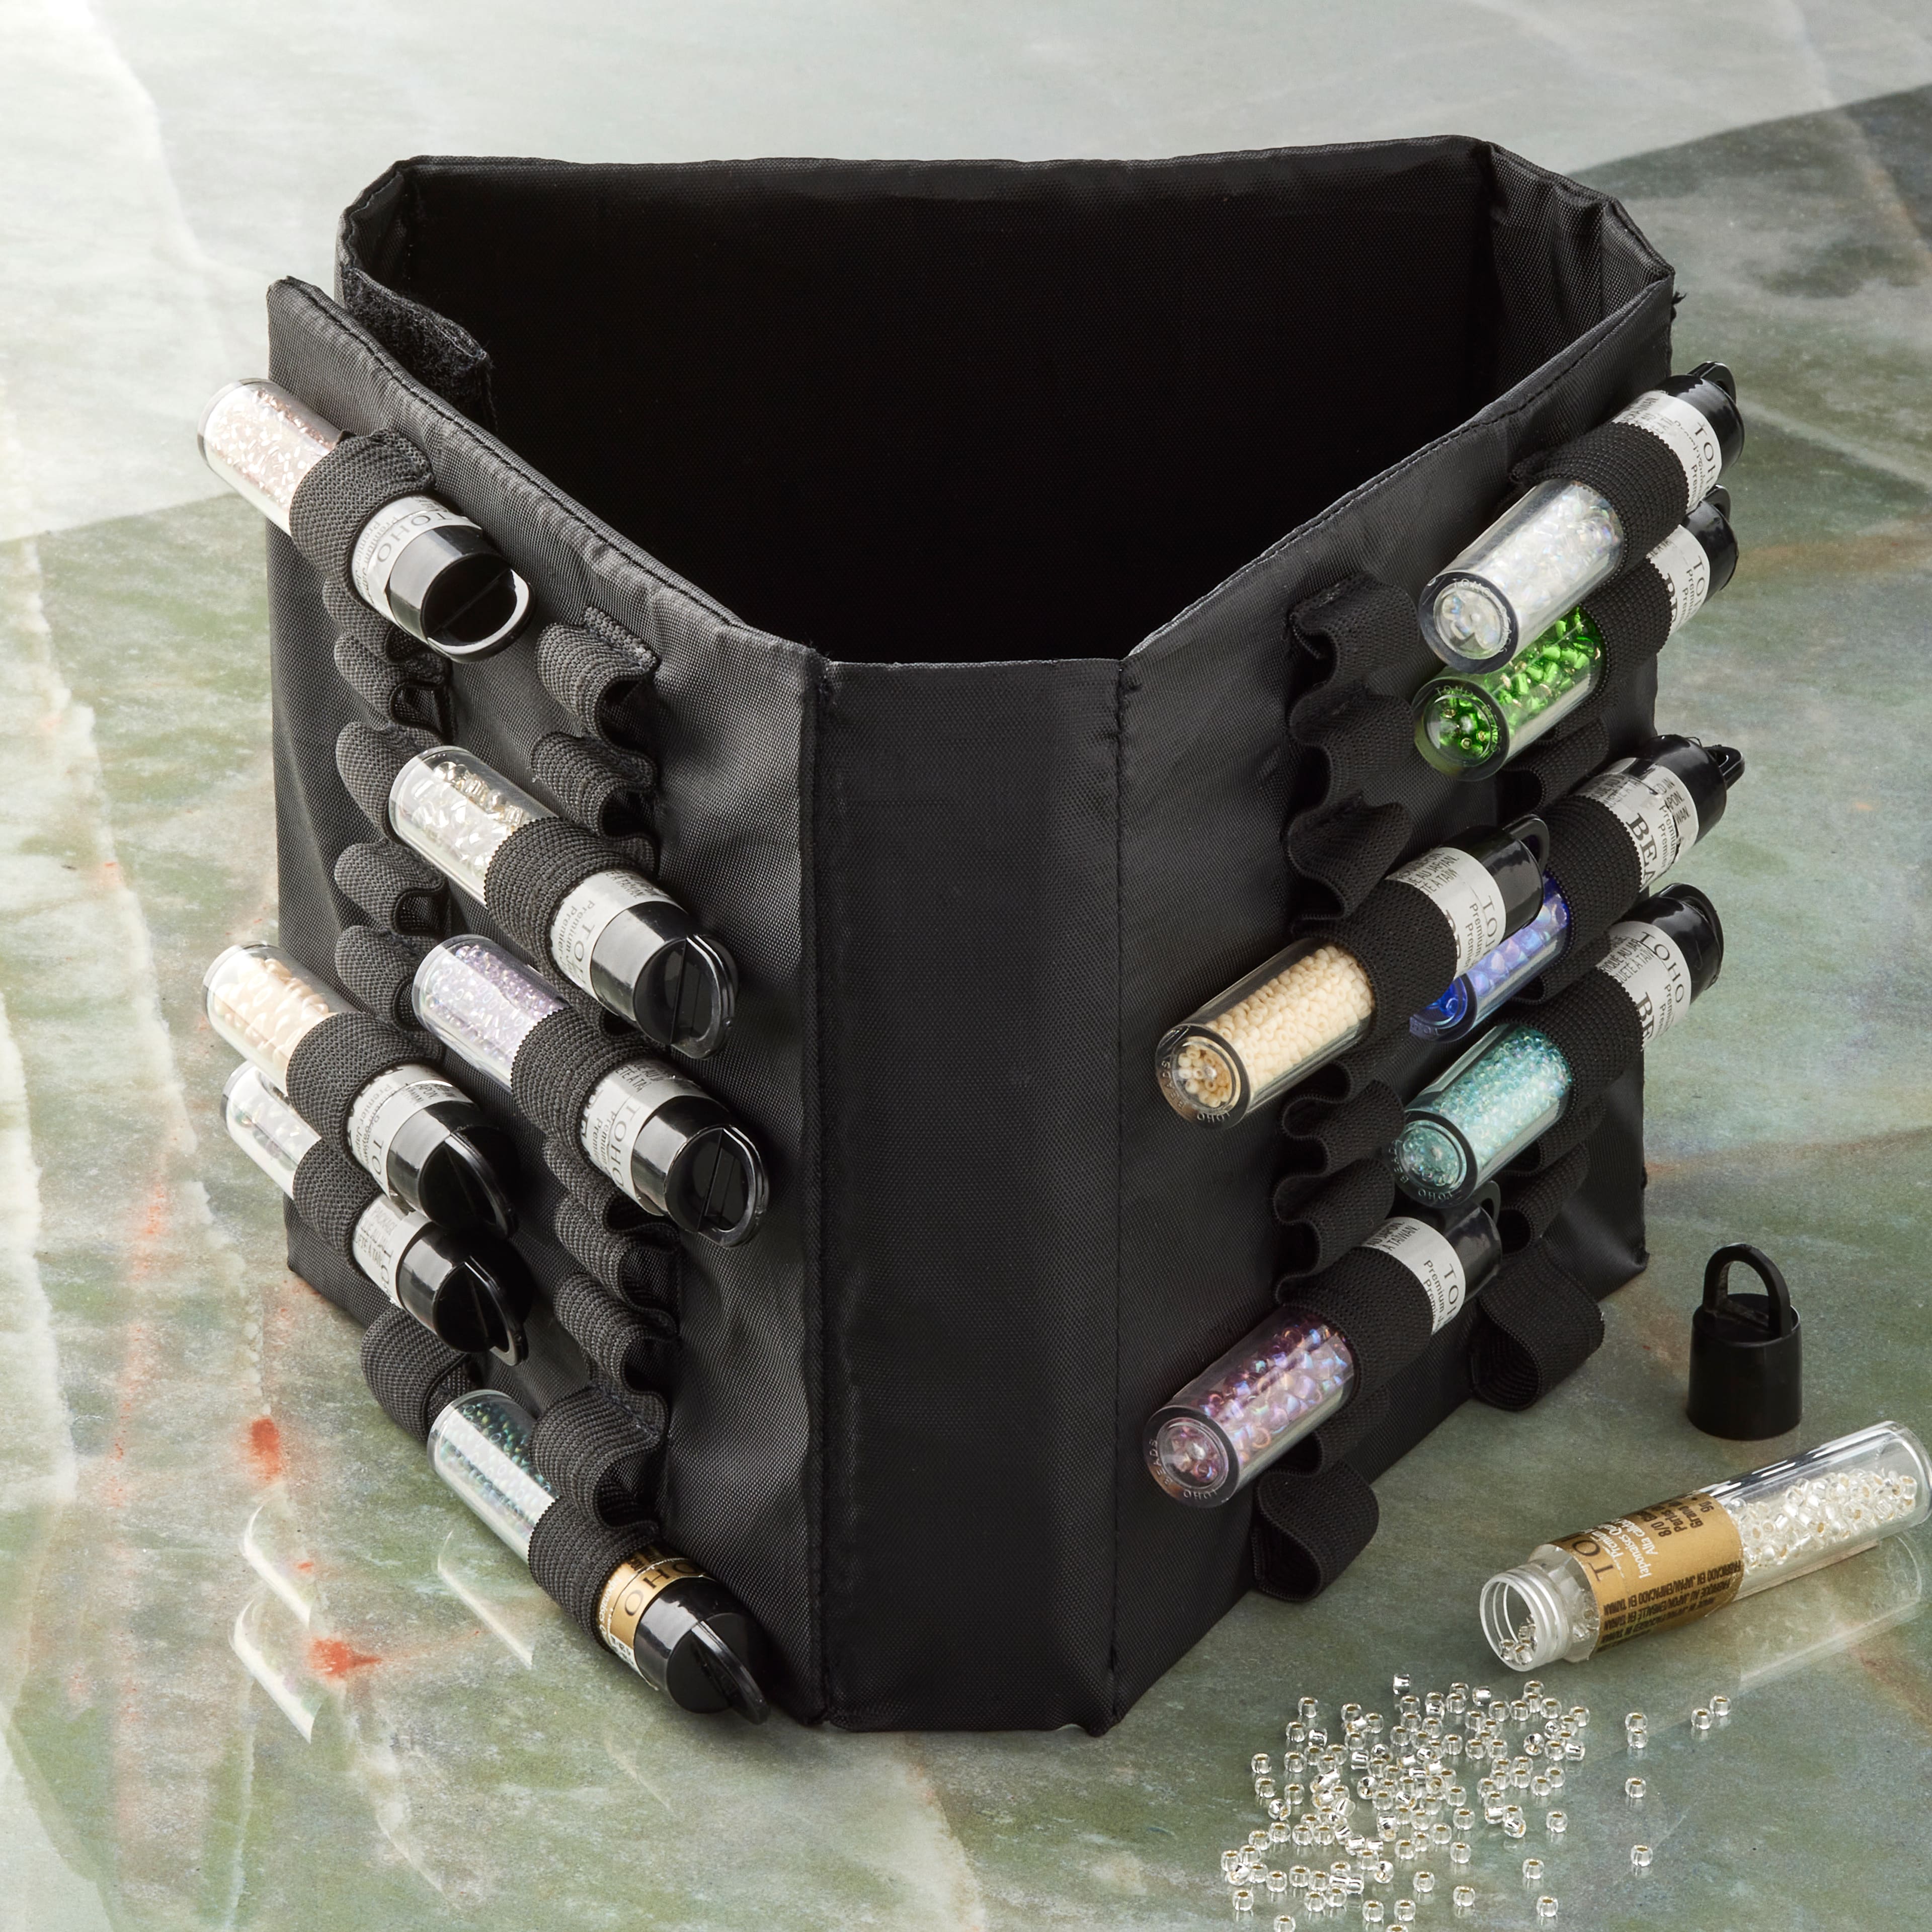 Bead Organizer with Removable Bead Containers by Bead Landing™